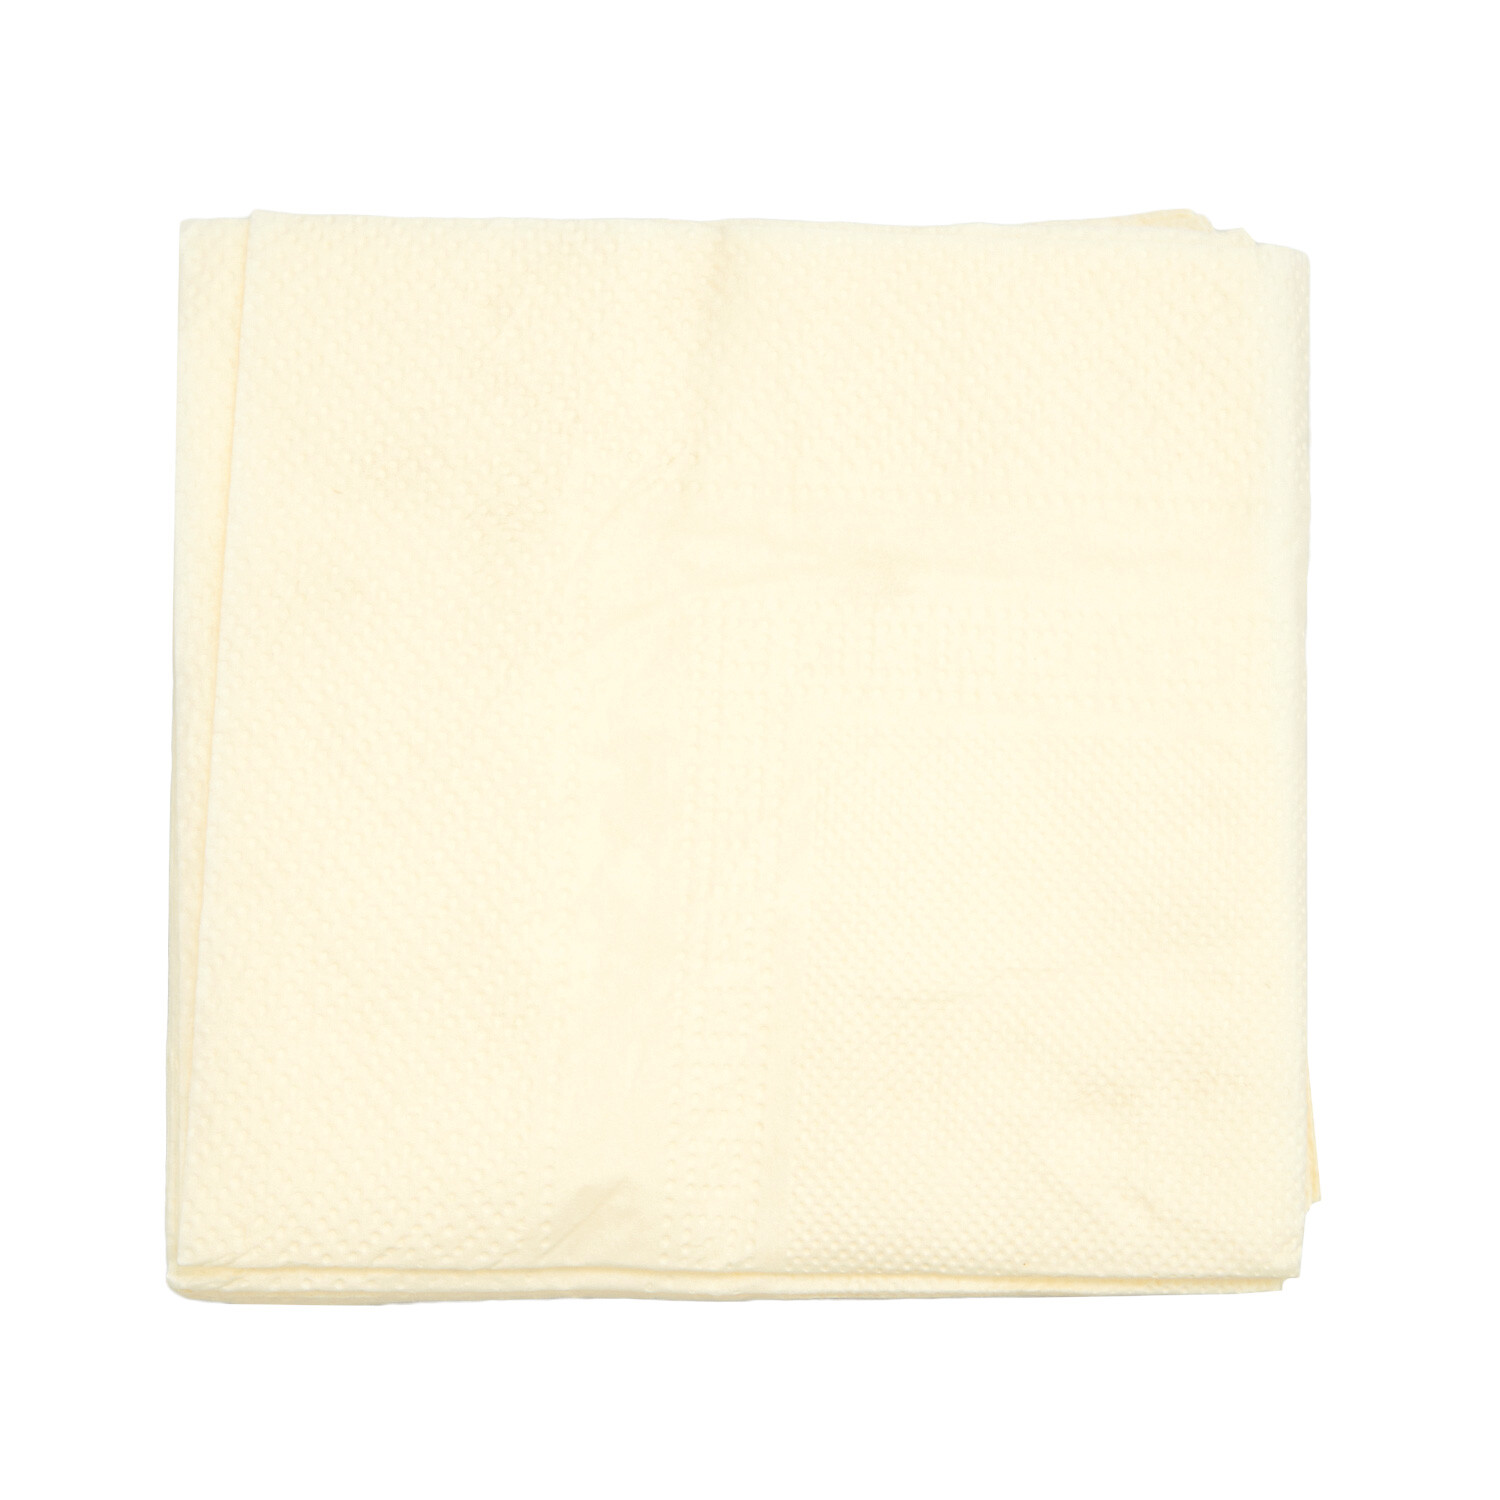 Pack of My Home Napkins - Cream Image 1